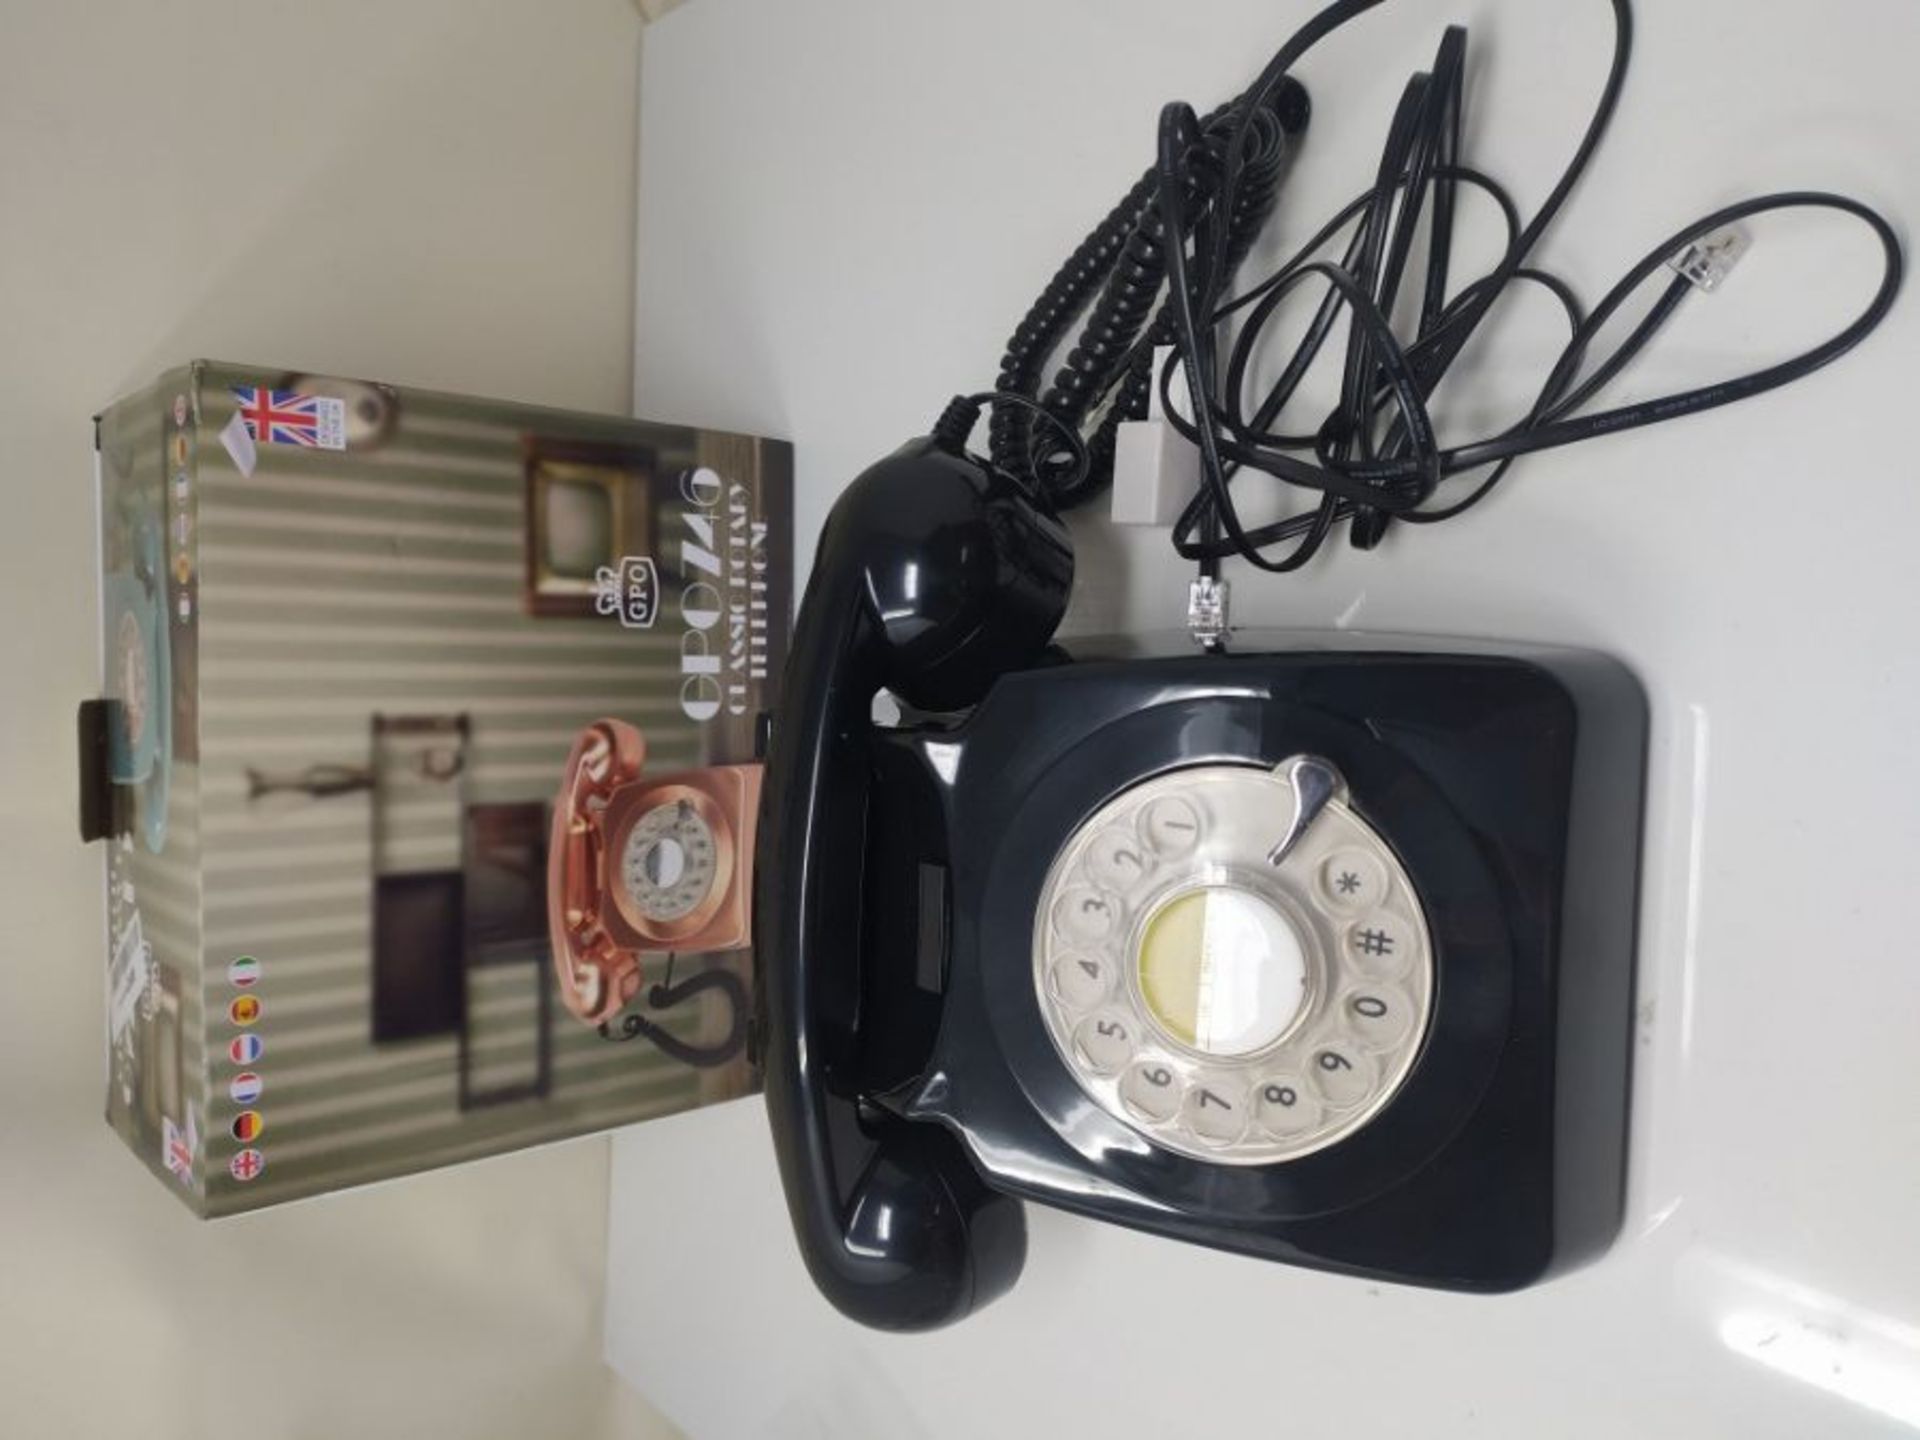 RRP £52.00 GPO 746 Rotary 1970s-Style Retro Landline Telephone, Classic Telephone with Ringer On/ - Image 2 of 2